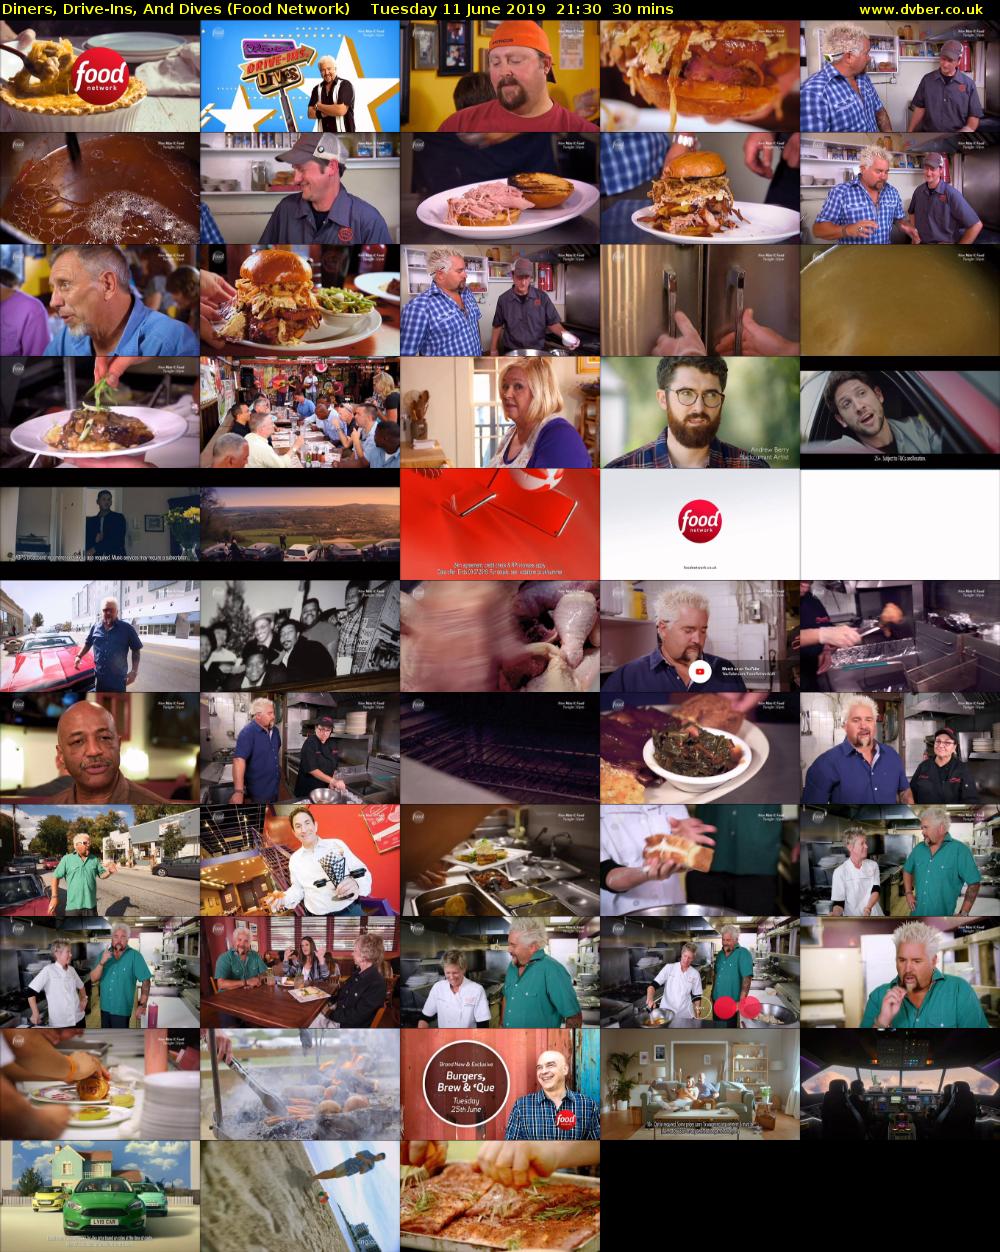 Diners, Drive-Ins, And Dives (Food Network) Tuesday 11 June 2019 21:30 - 22:00